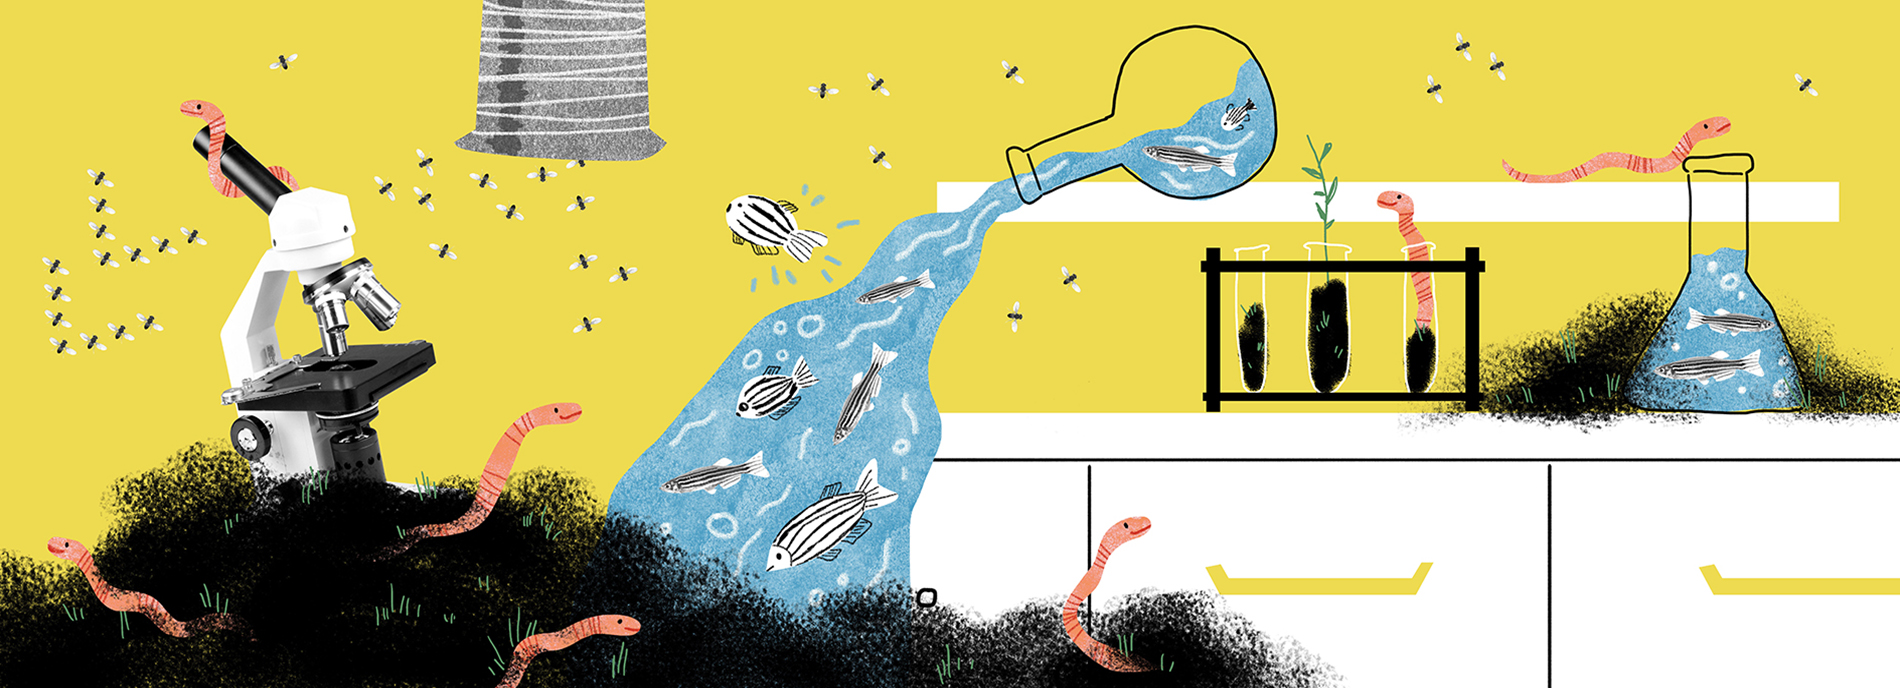 A lighthearted, colorful, chaotic lab scene with fruit flies flying in formation, worms peeking out of piles of dirt and zebrafish spilling out of beakers.